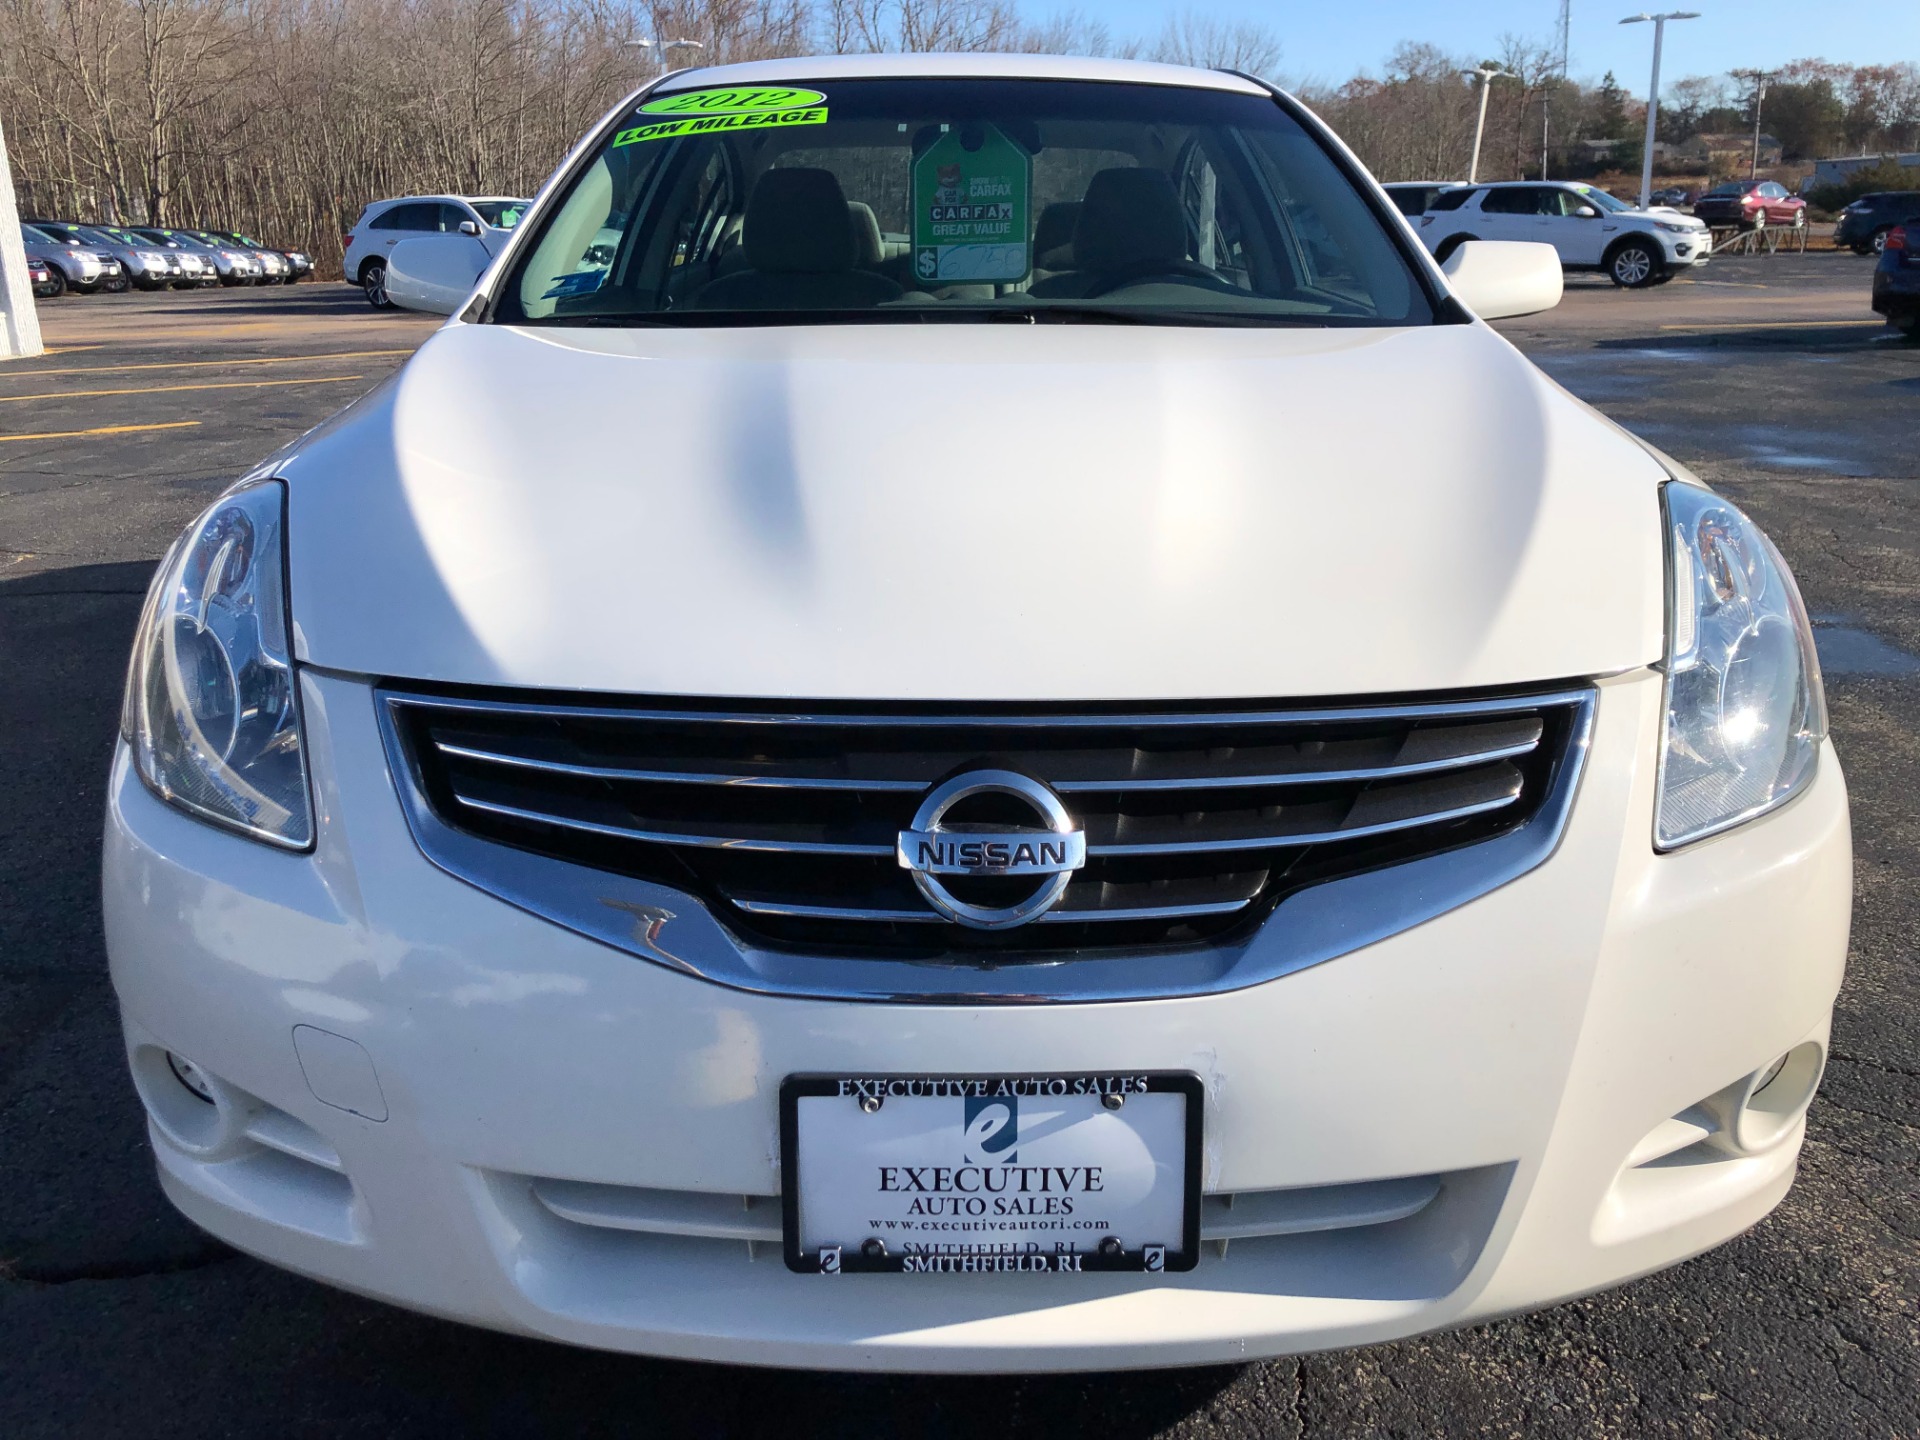 Used 2012 Nissan Altima 2 5s 2 5s For Sale 6 750 Executive